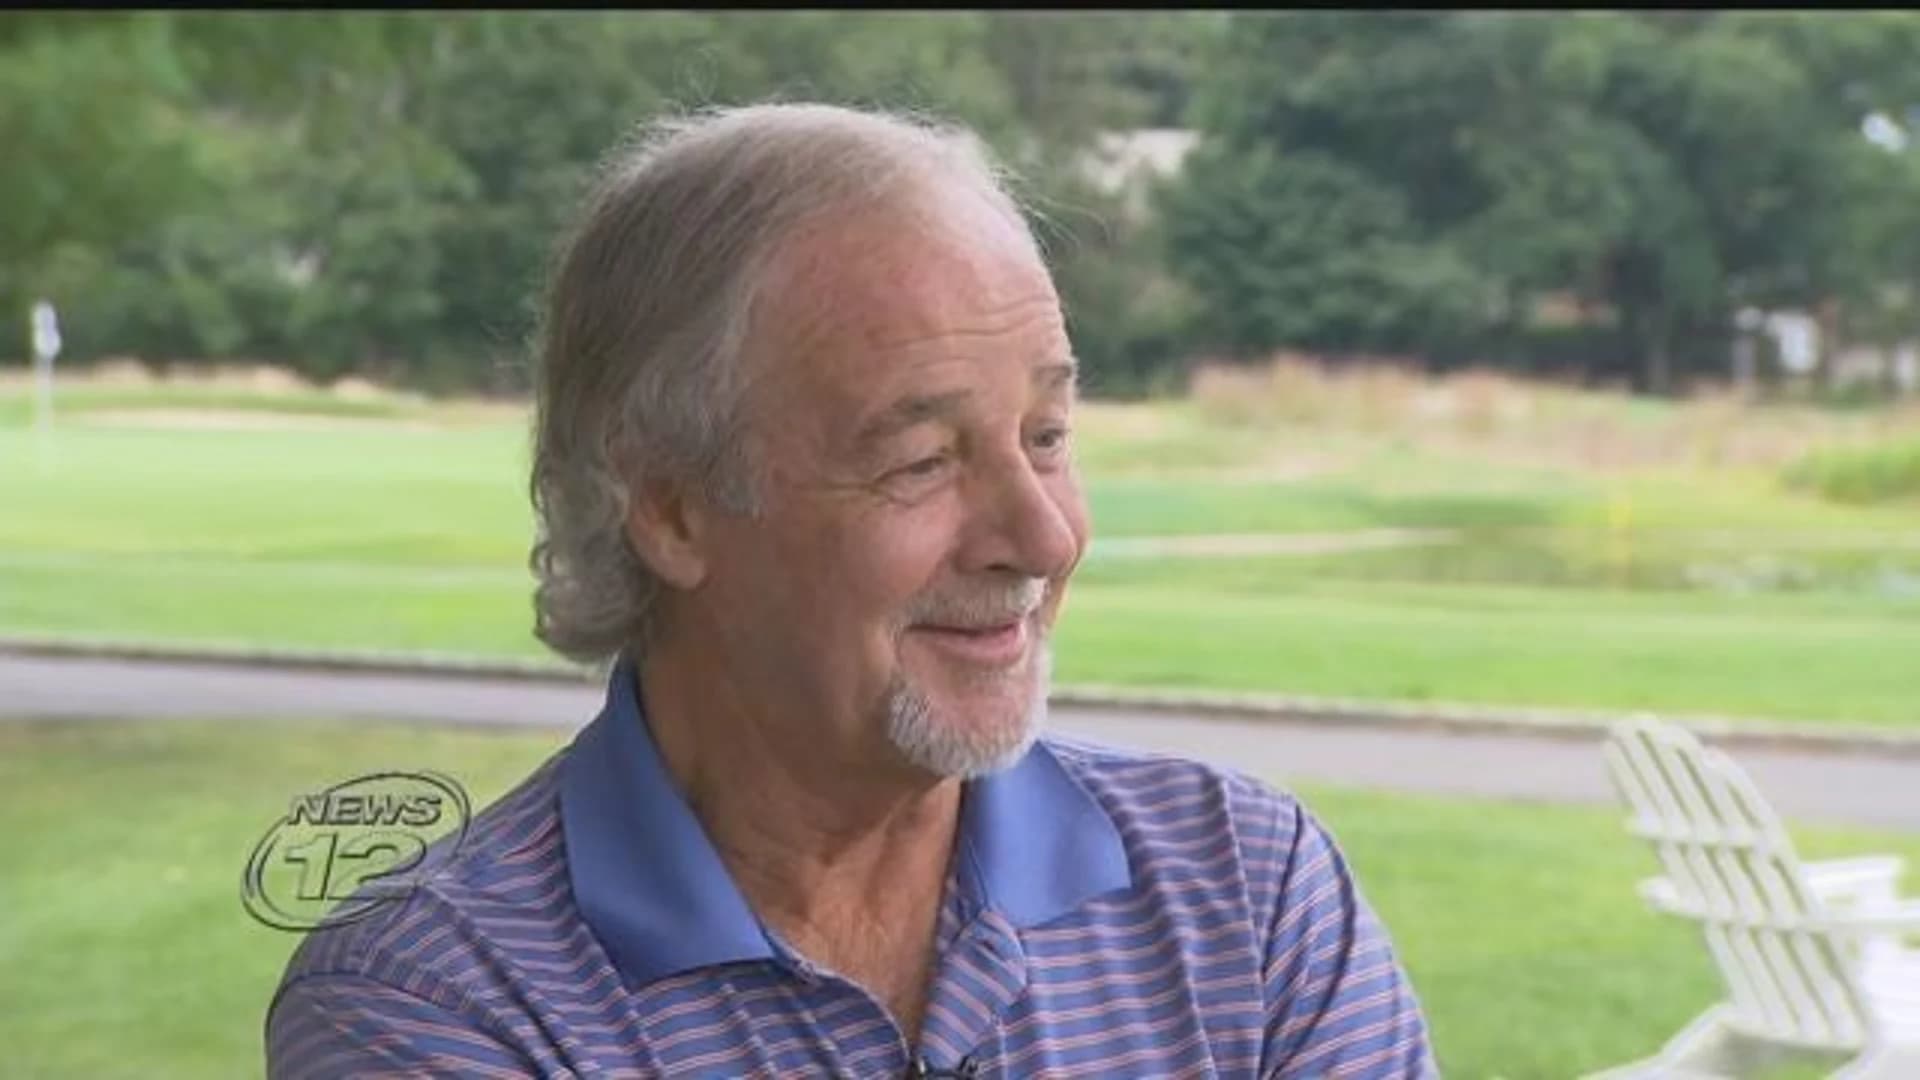 LI man gets hole-in-one at same hole where he suffered heart attack